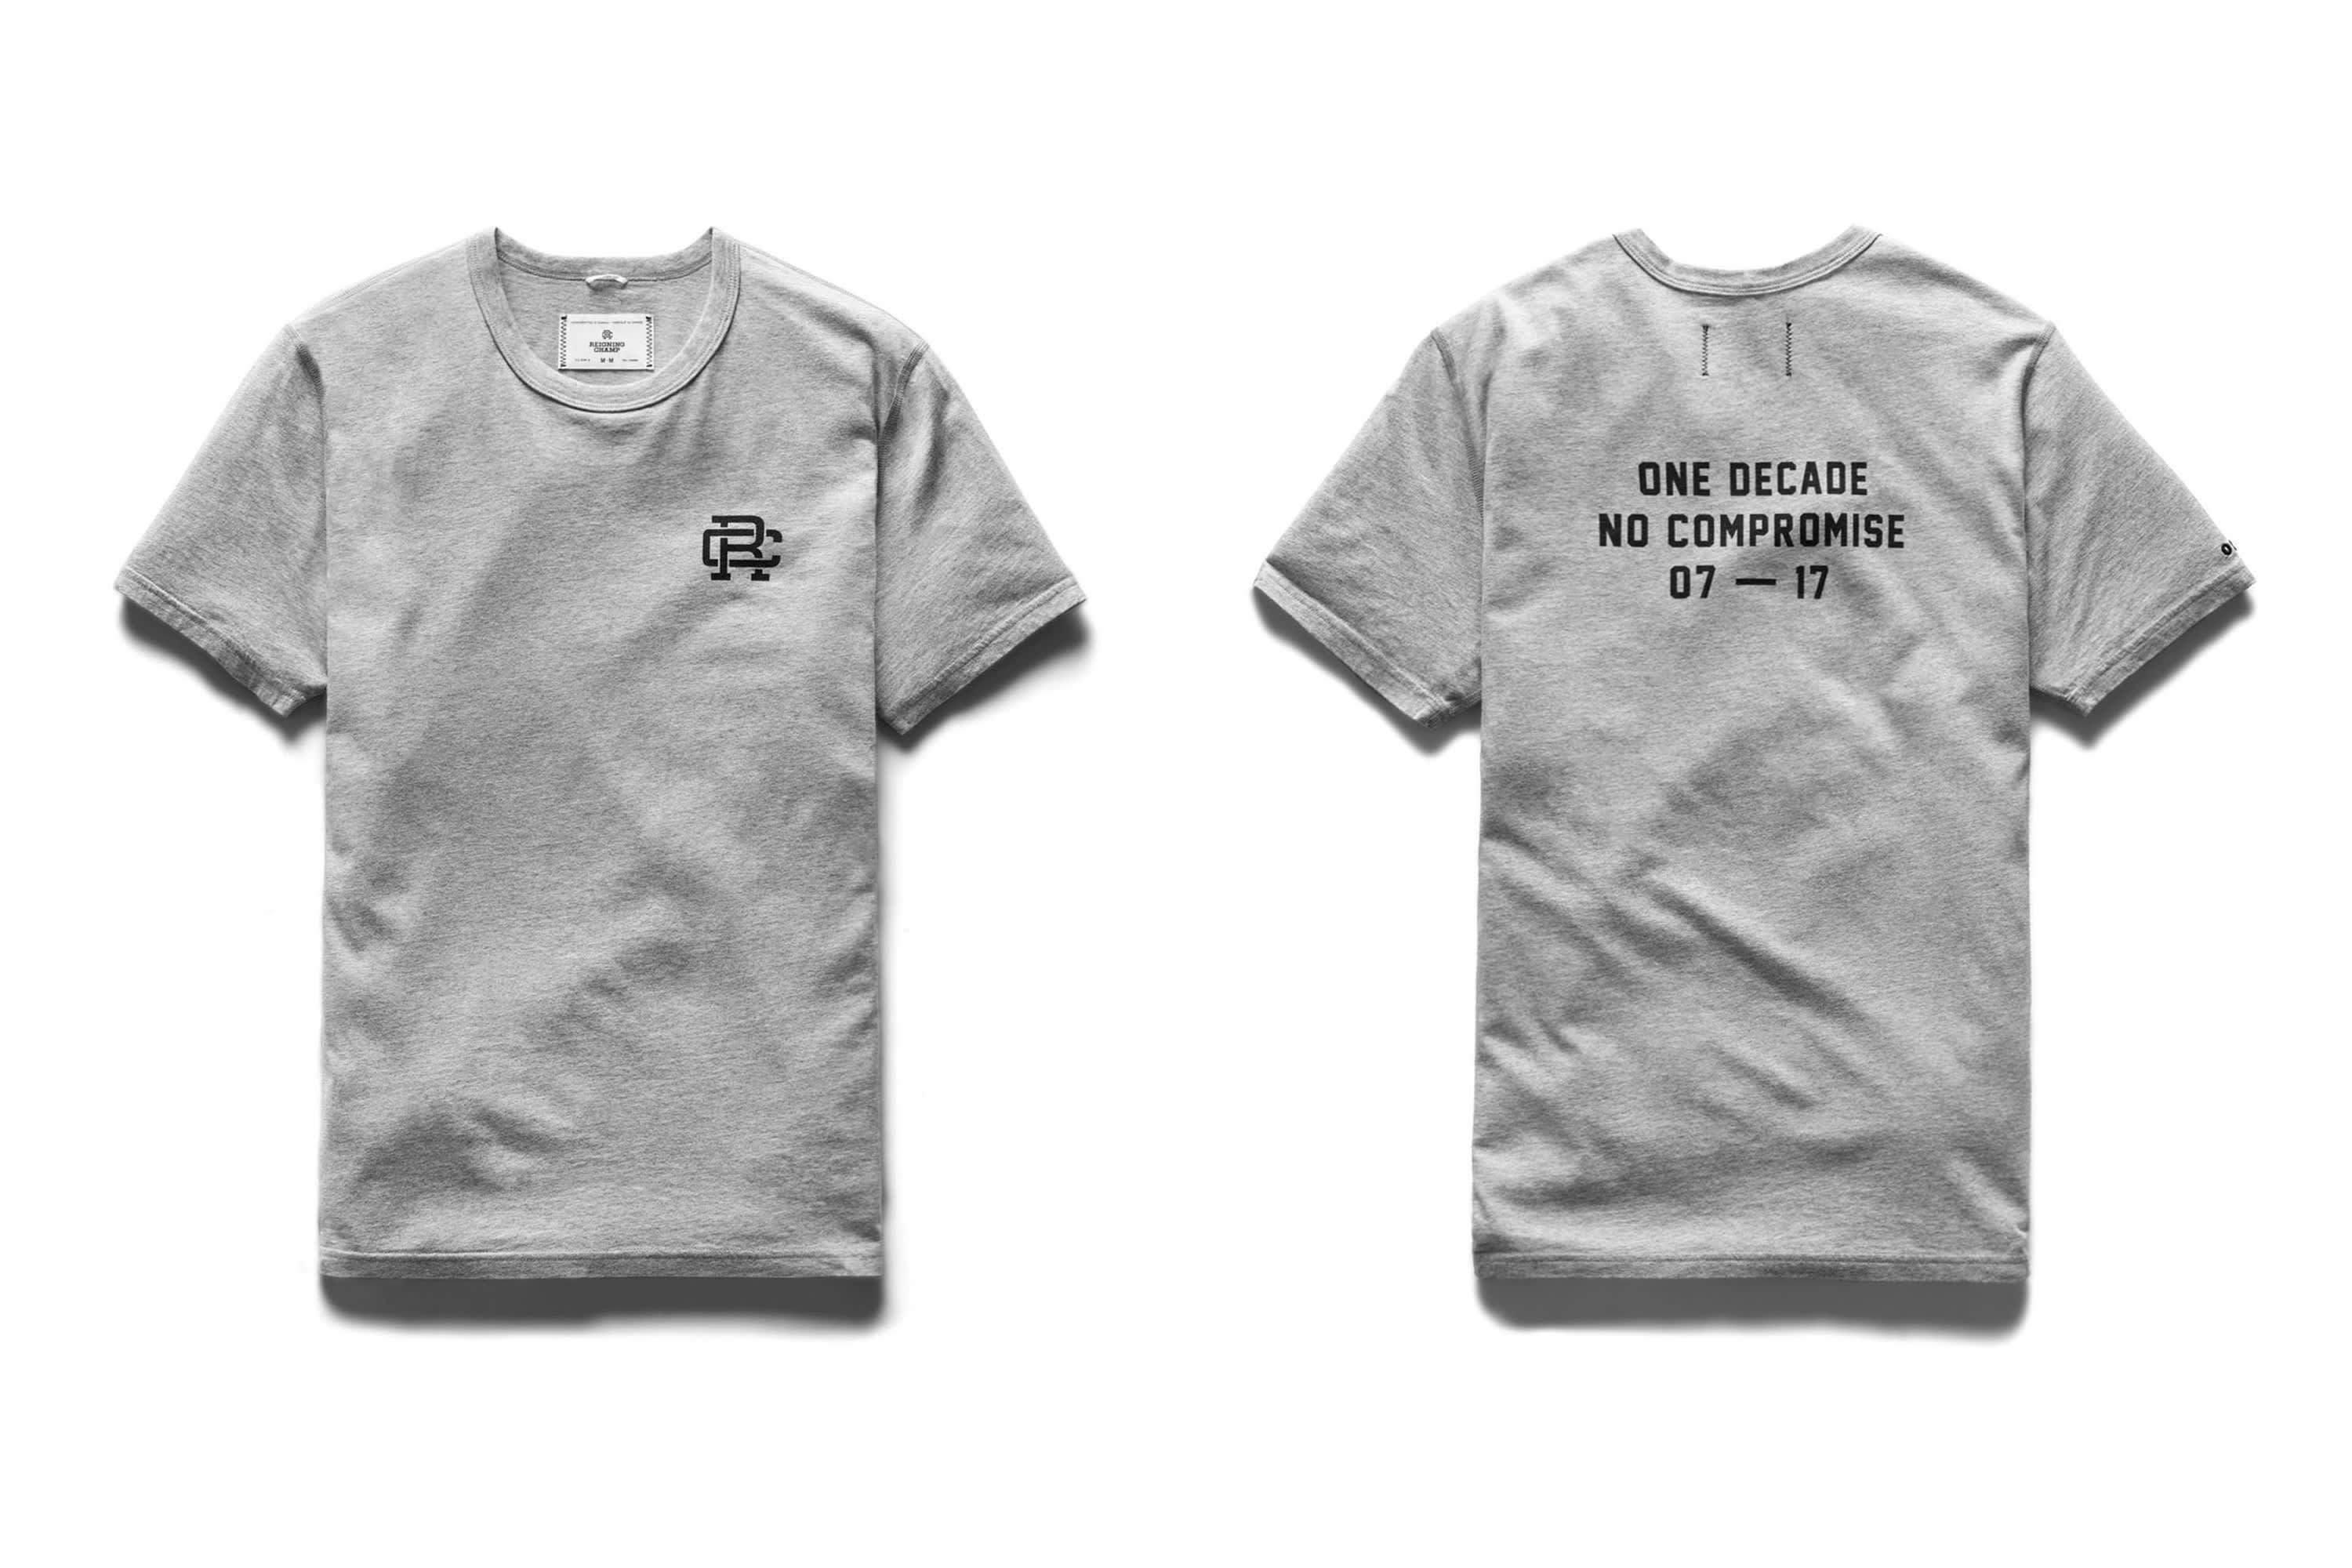 Reigning Champ Celebrates 10 Year Anniversary With Limited Edition Collection